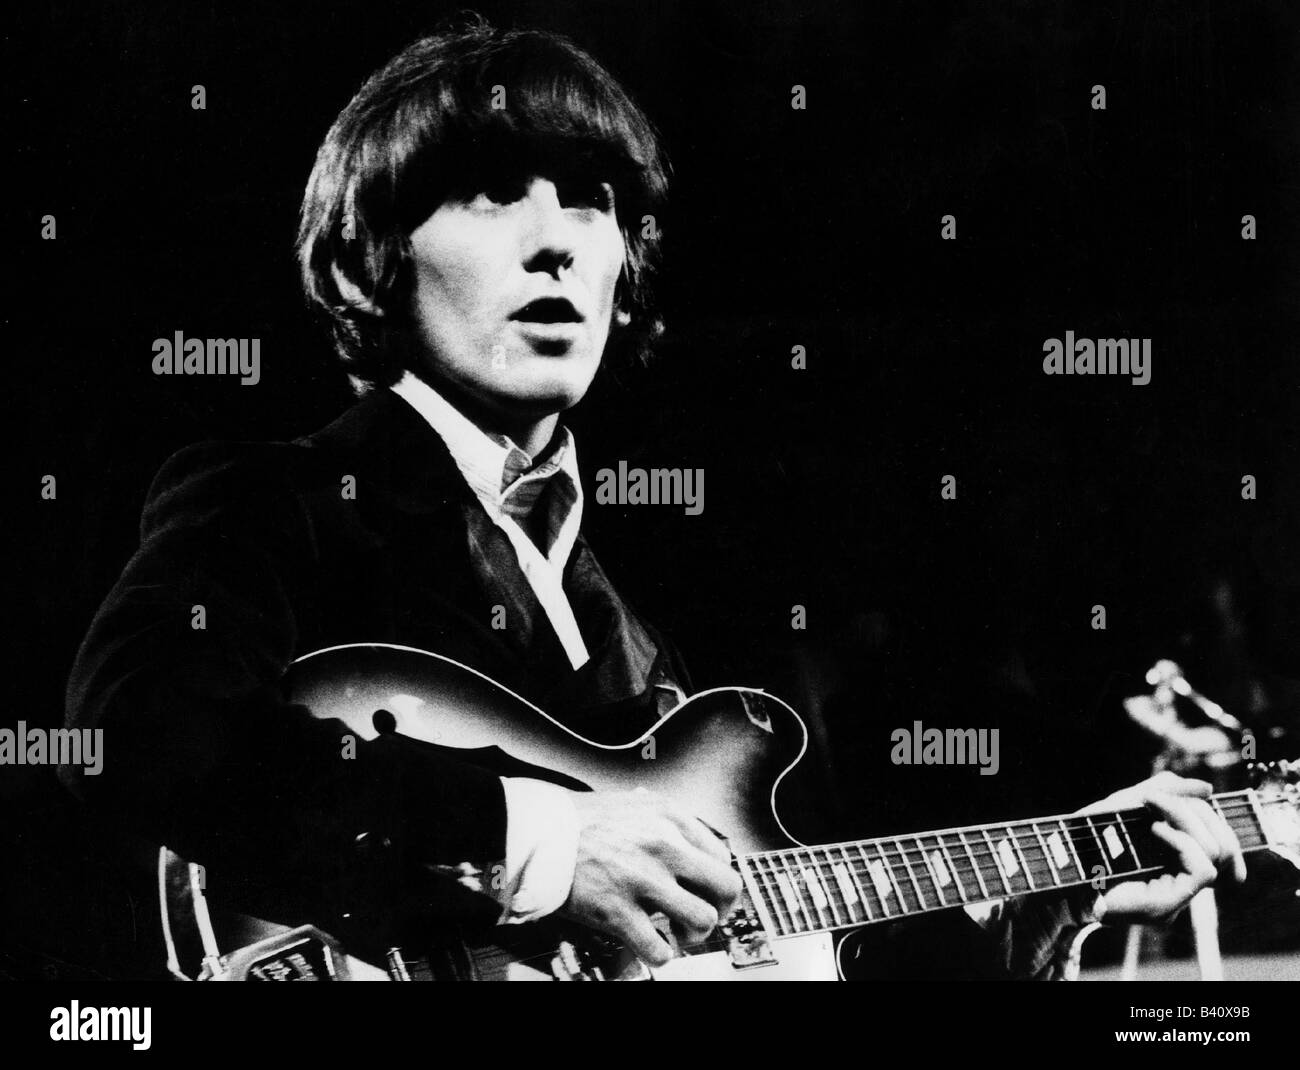 Harrison, George, 25.2.1943 - 29.11.2001, British musician, at a perfomance of  'The Beatles', half length, 1966, Stock Photo